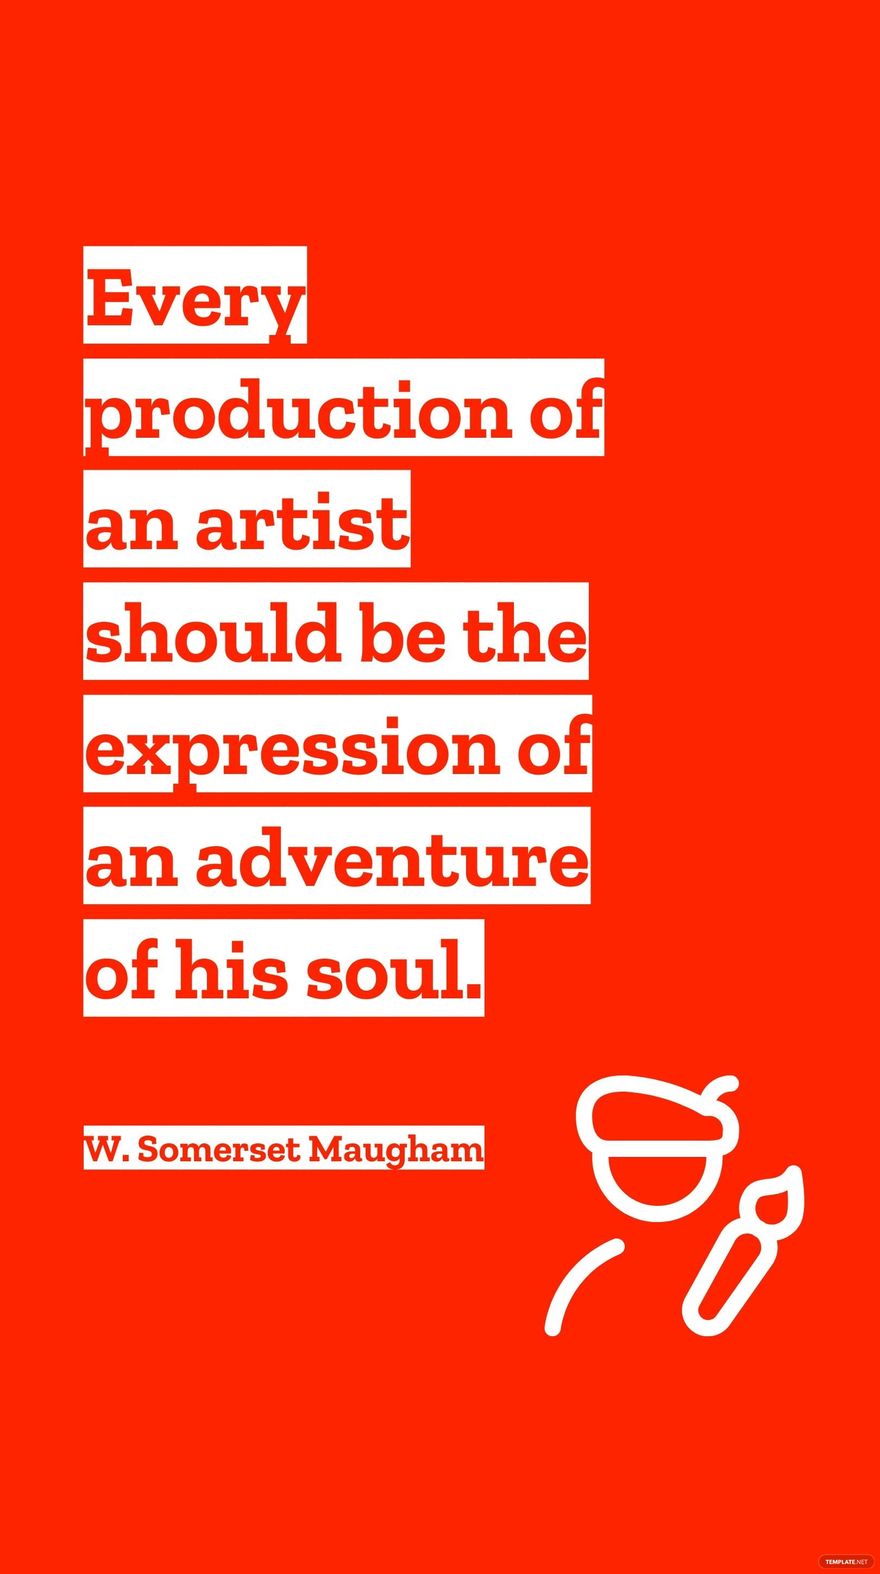 W. Somerset Maugham - Every production of an artist should be the expression of an adventure of his soul. in JPG